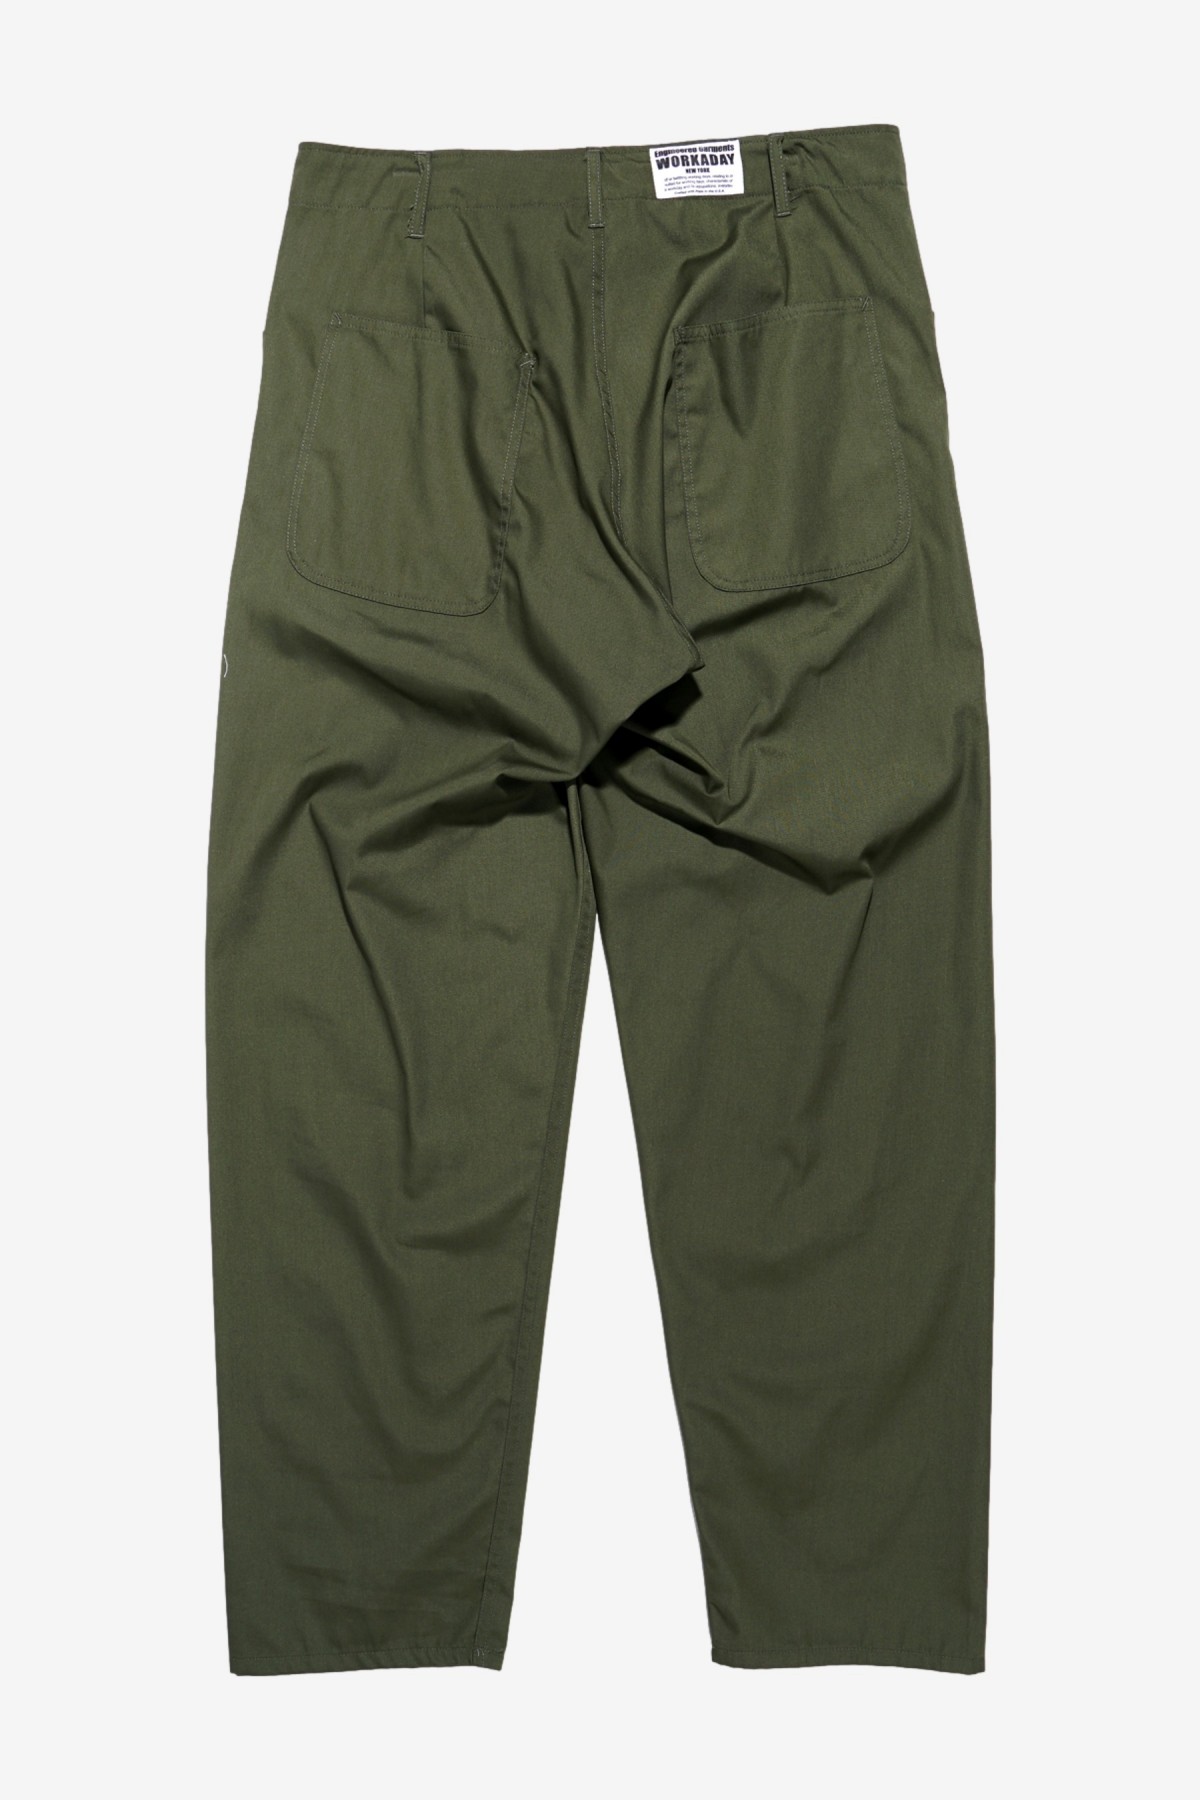 Engineered Garments Workaday Fatigue Pant in Olive Cotton Reverse Sateen